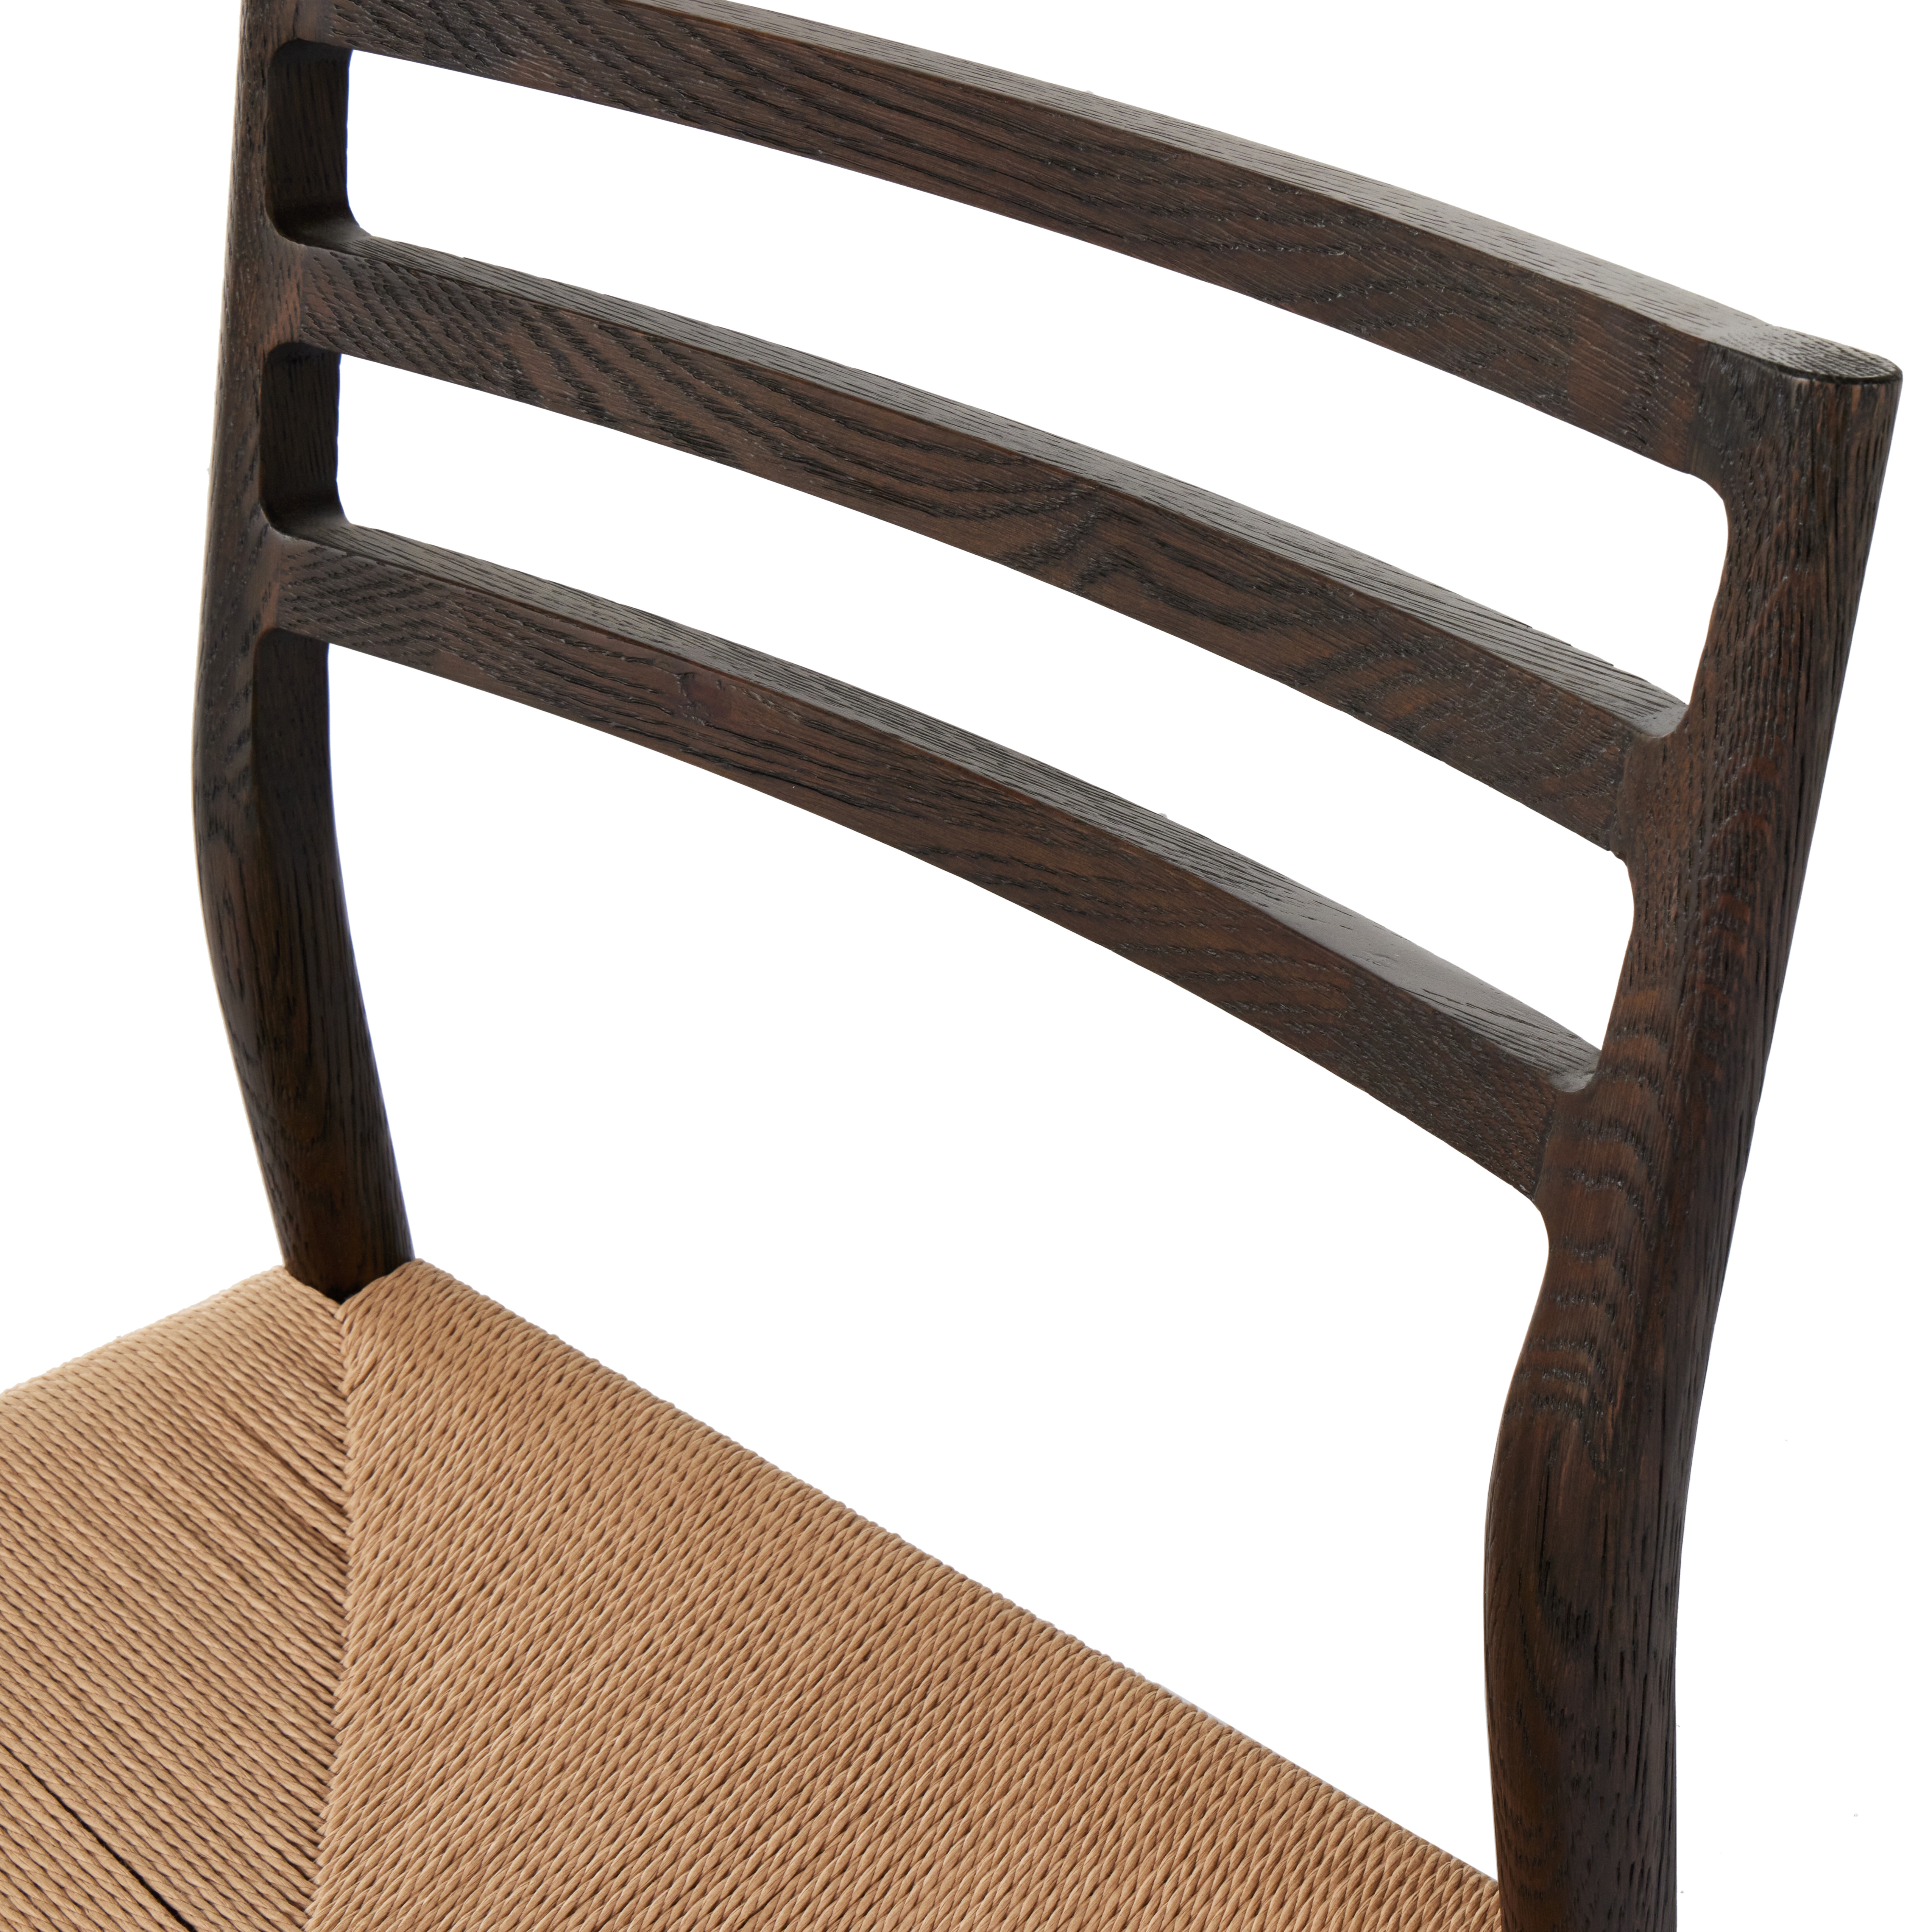 Glenmore Woven Dining Chair-Light Carbon - Image 10